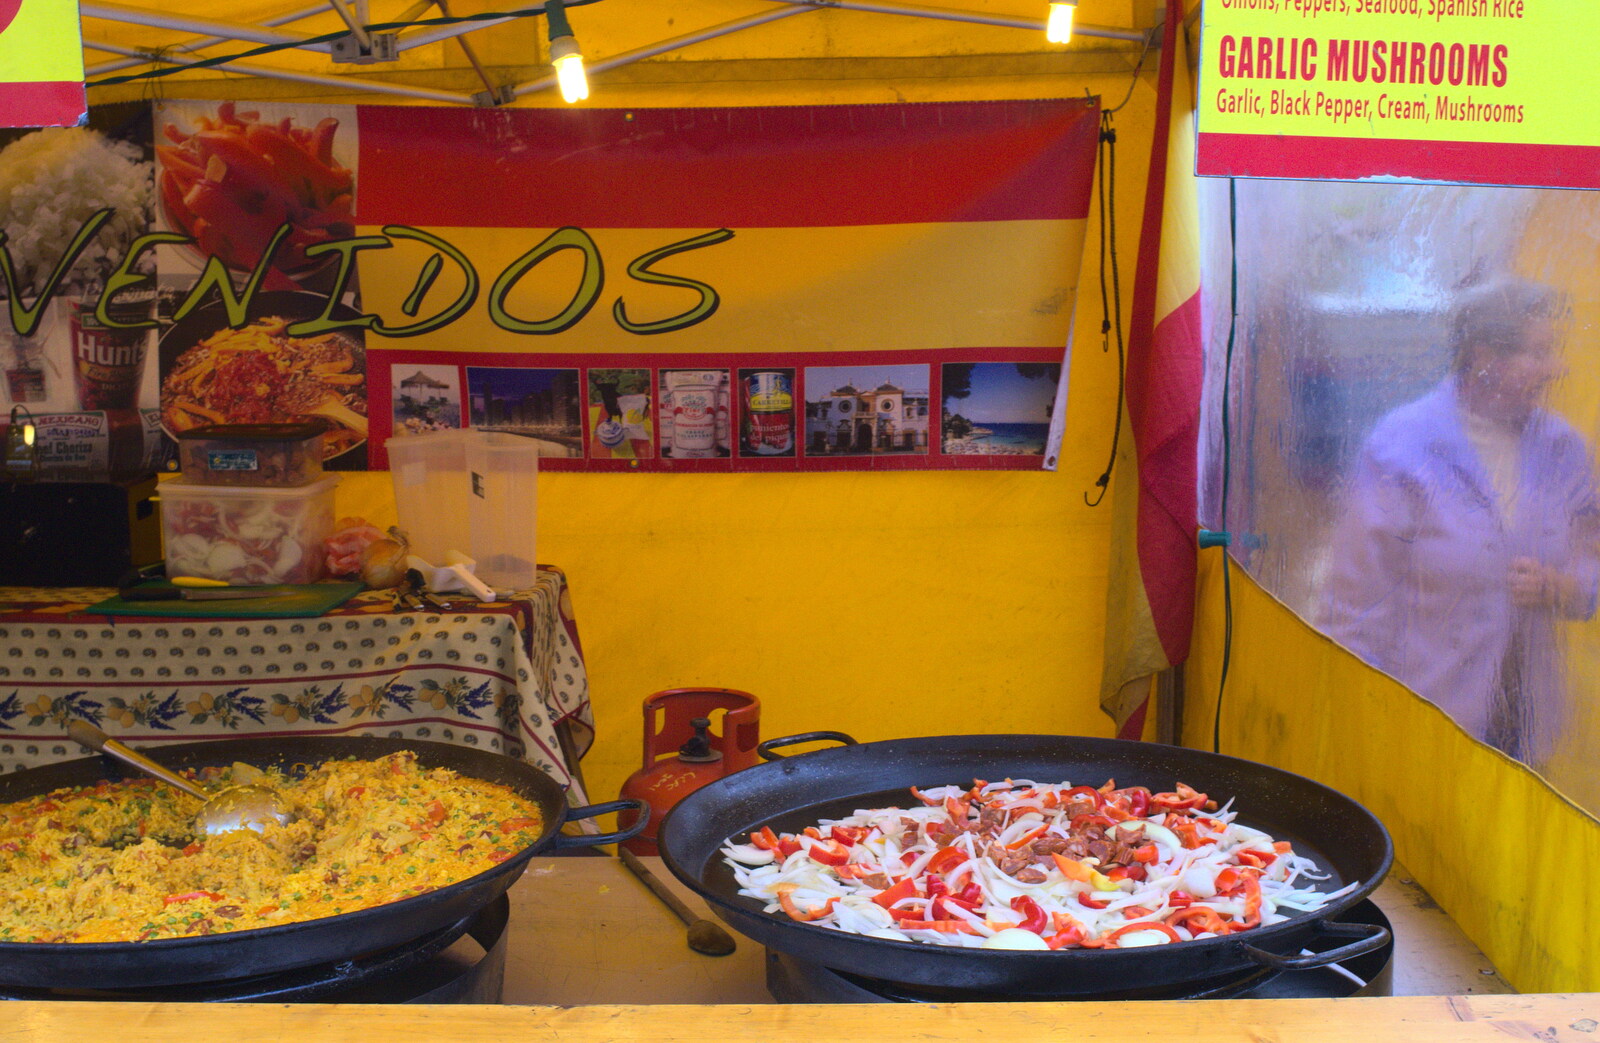 A Spanish food stall from TouchType Office Life and Pizza, Southwark, London - 20th October 2012